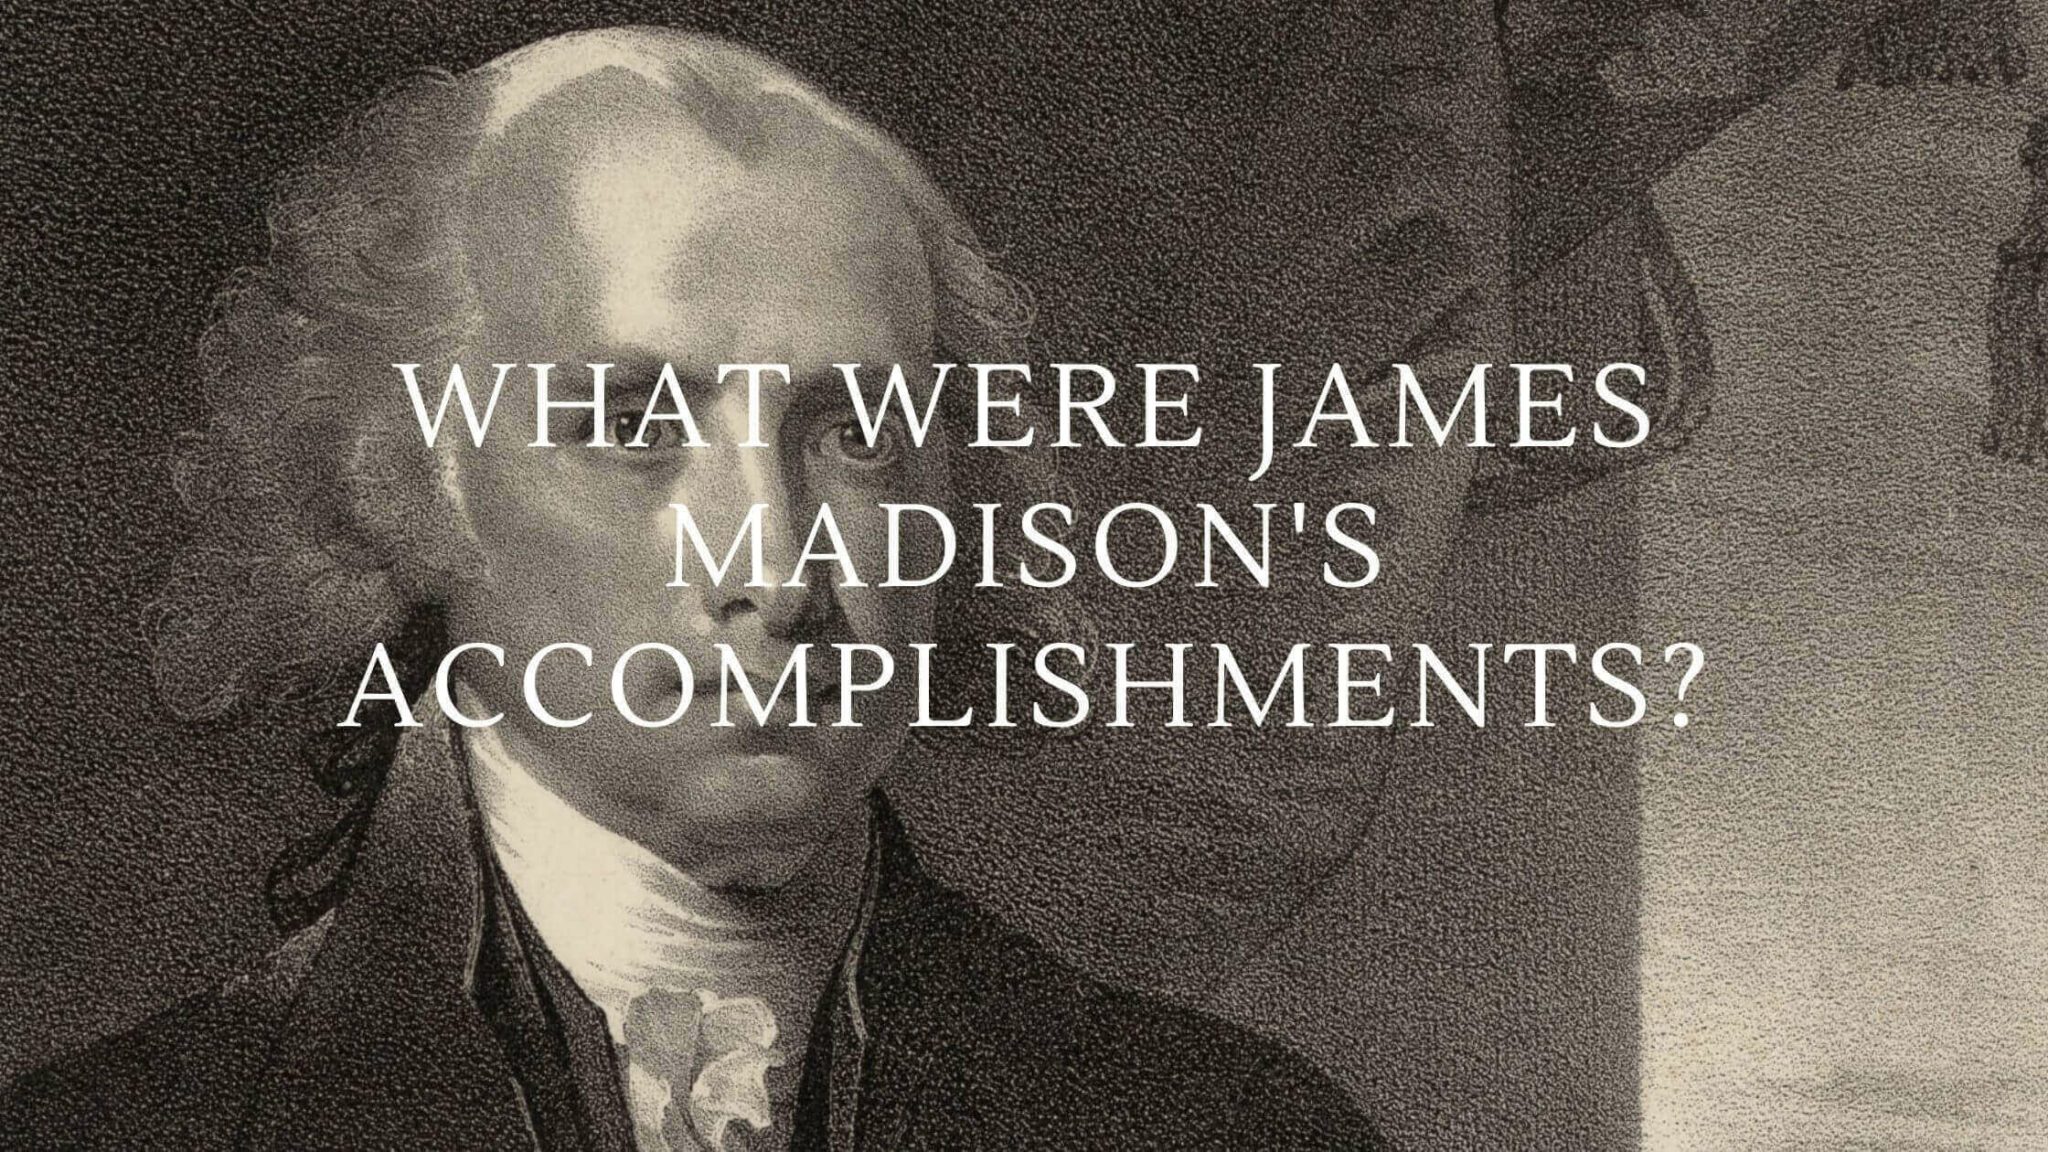 an essay about james madison